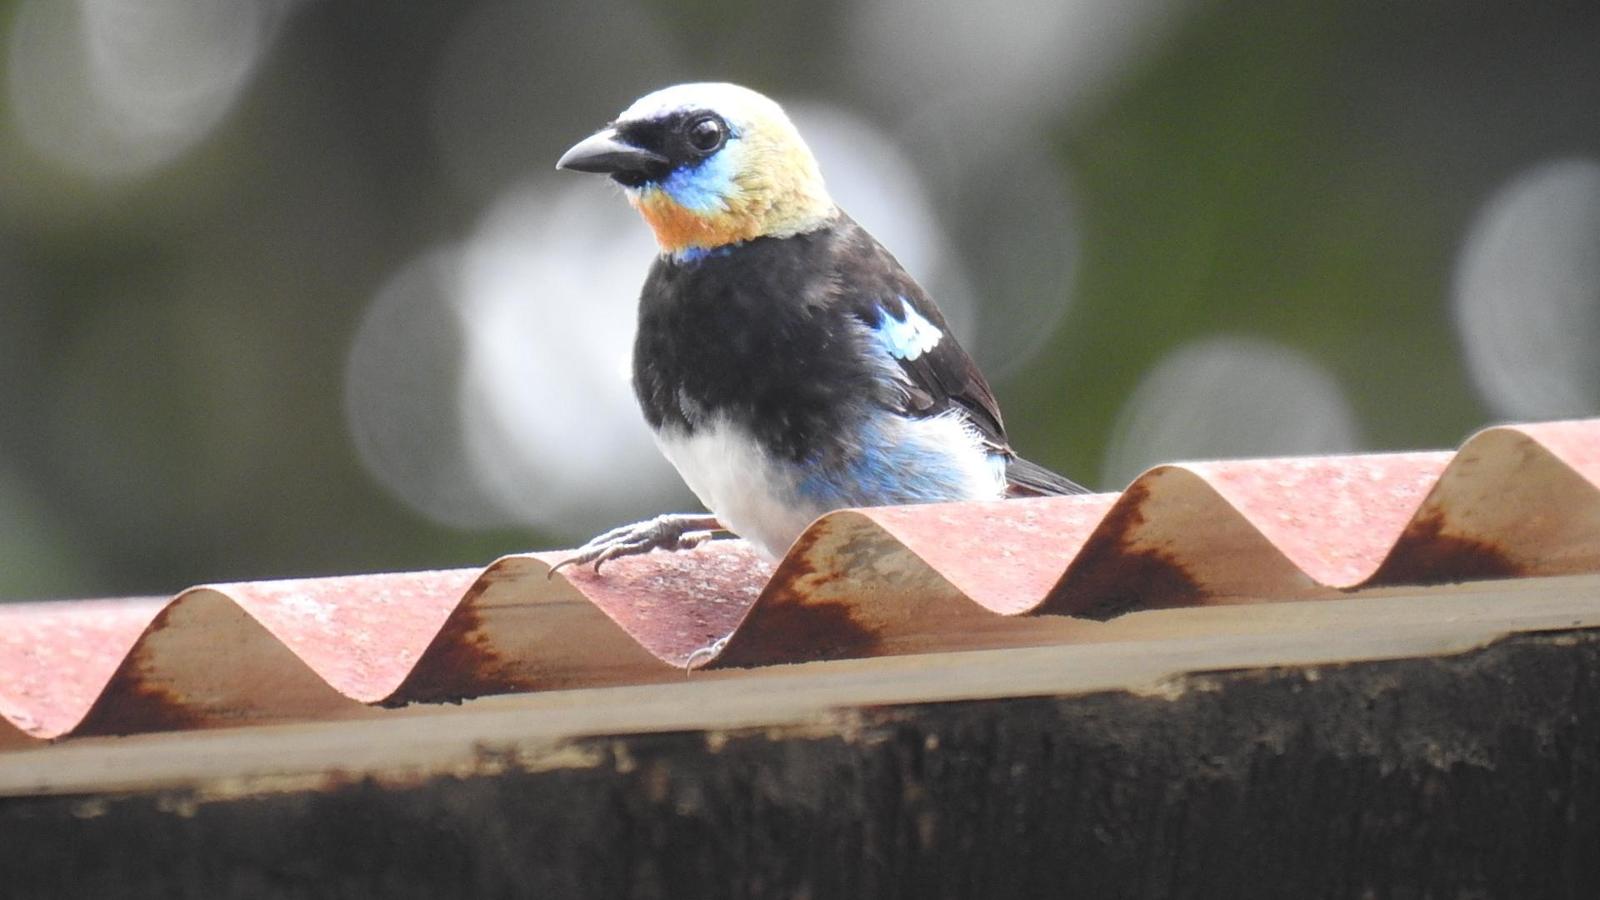 Golden-hooded Tanager Photo by Julio Delgado